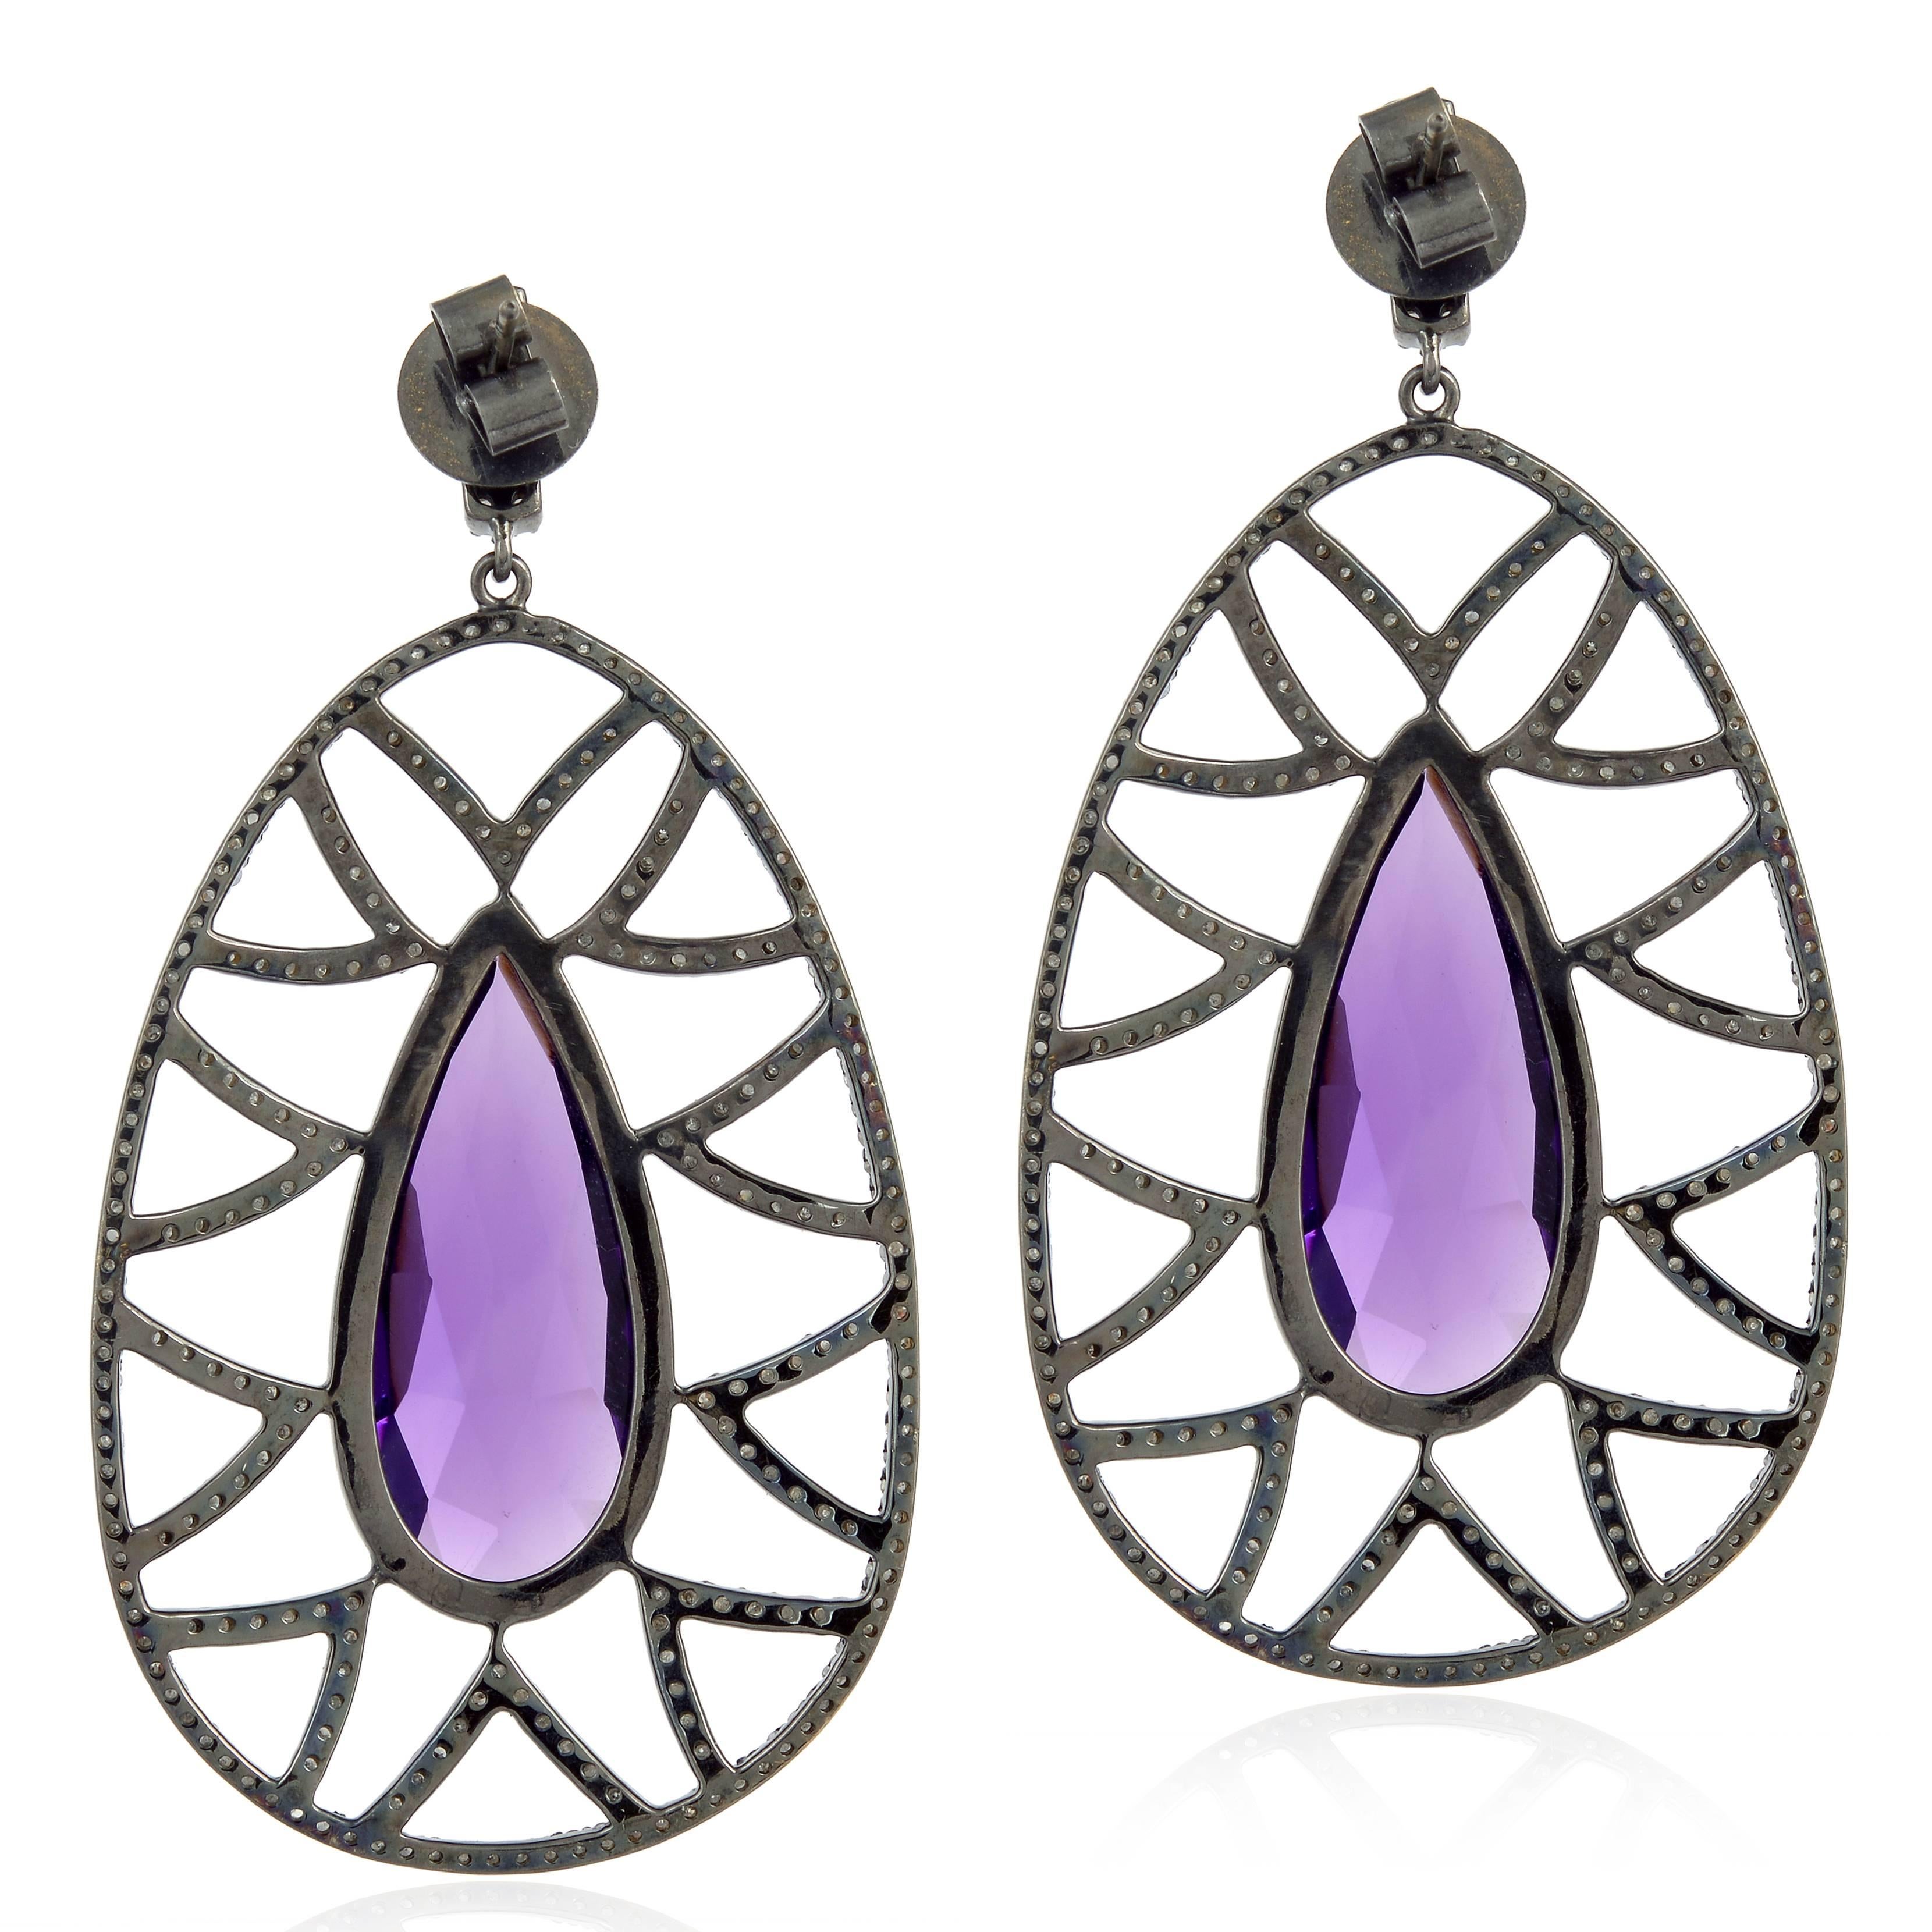 These earrings are cast in 18K gold and sterling silver.  It is hand set in 20.57 carat amethyst and 4.63 carat of sparkling diamonds. The negative space accentuates the main stone to create a dazzling dangle.  Complimentary conversion to clip-on